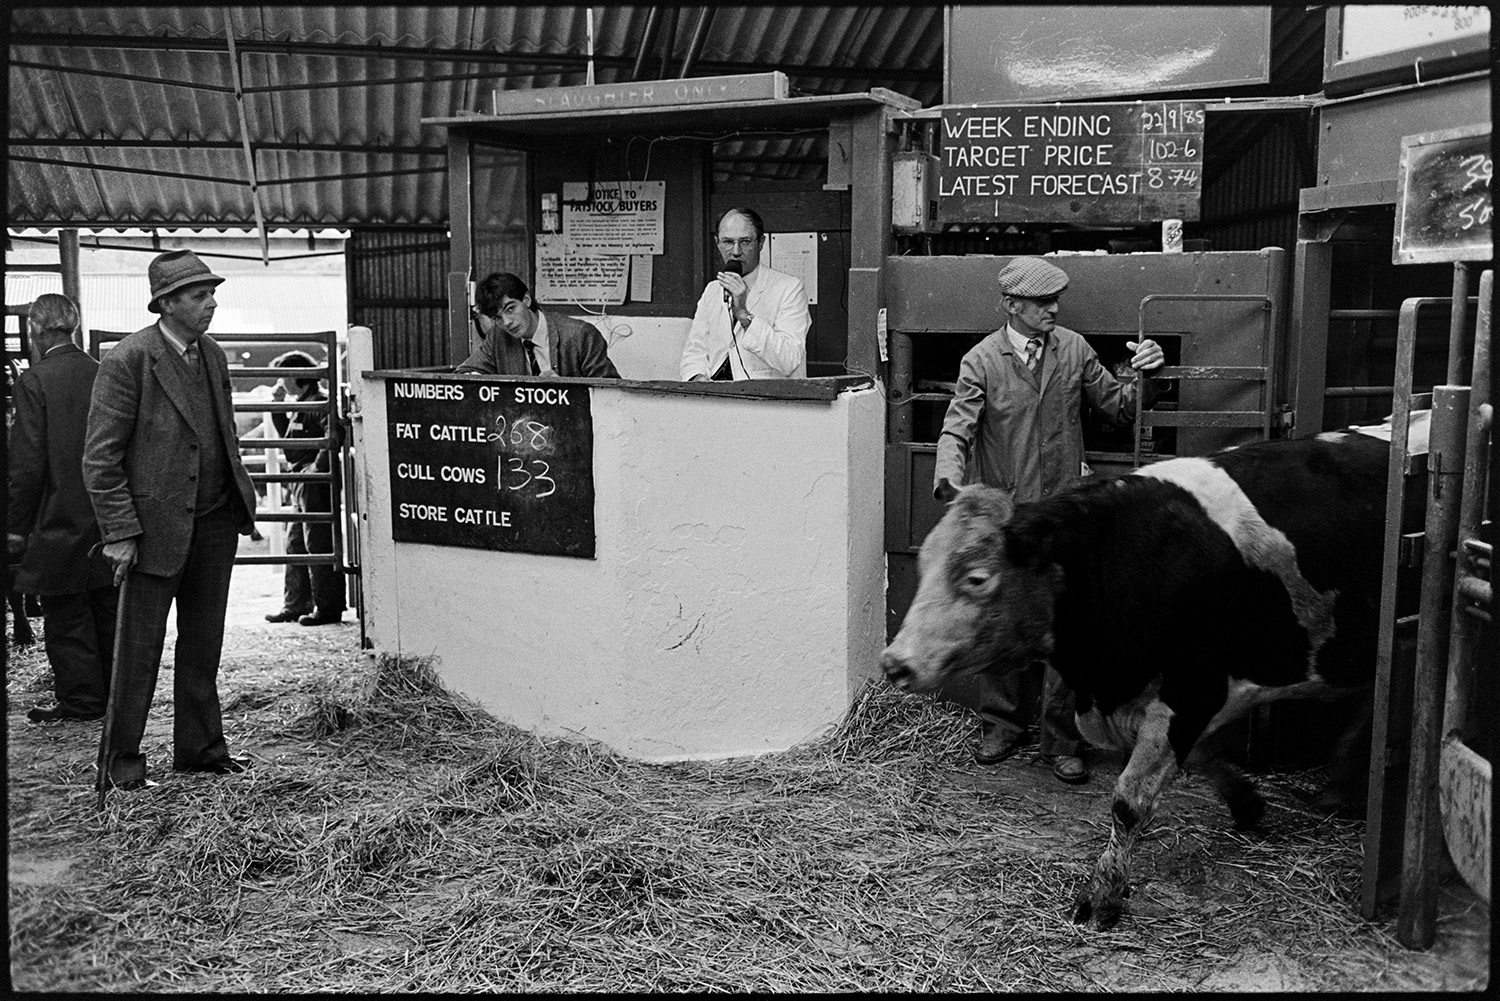 Farmers at market, sheep, cattle being auctioned in ring. 
[A man letting a cow into the ring to be auctioned at Holsworthy Market. The auctioneers are sat in a booth by the ring. One of them is speaking into a microphone.]